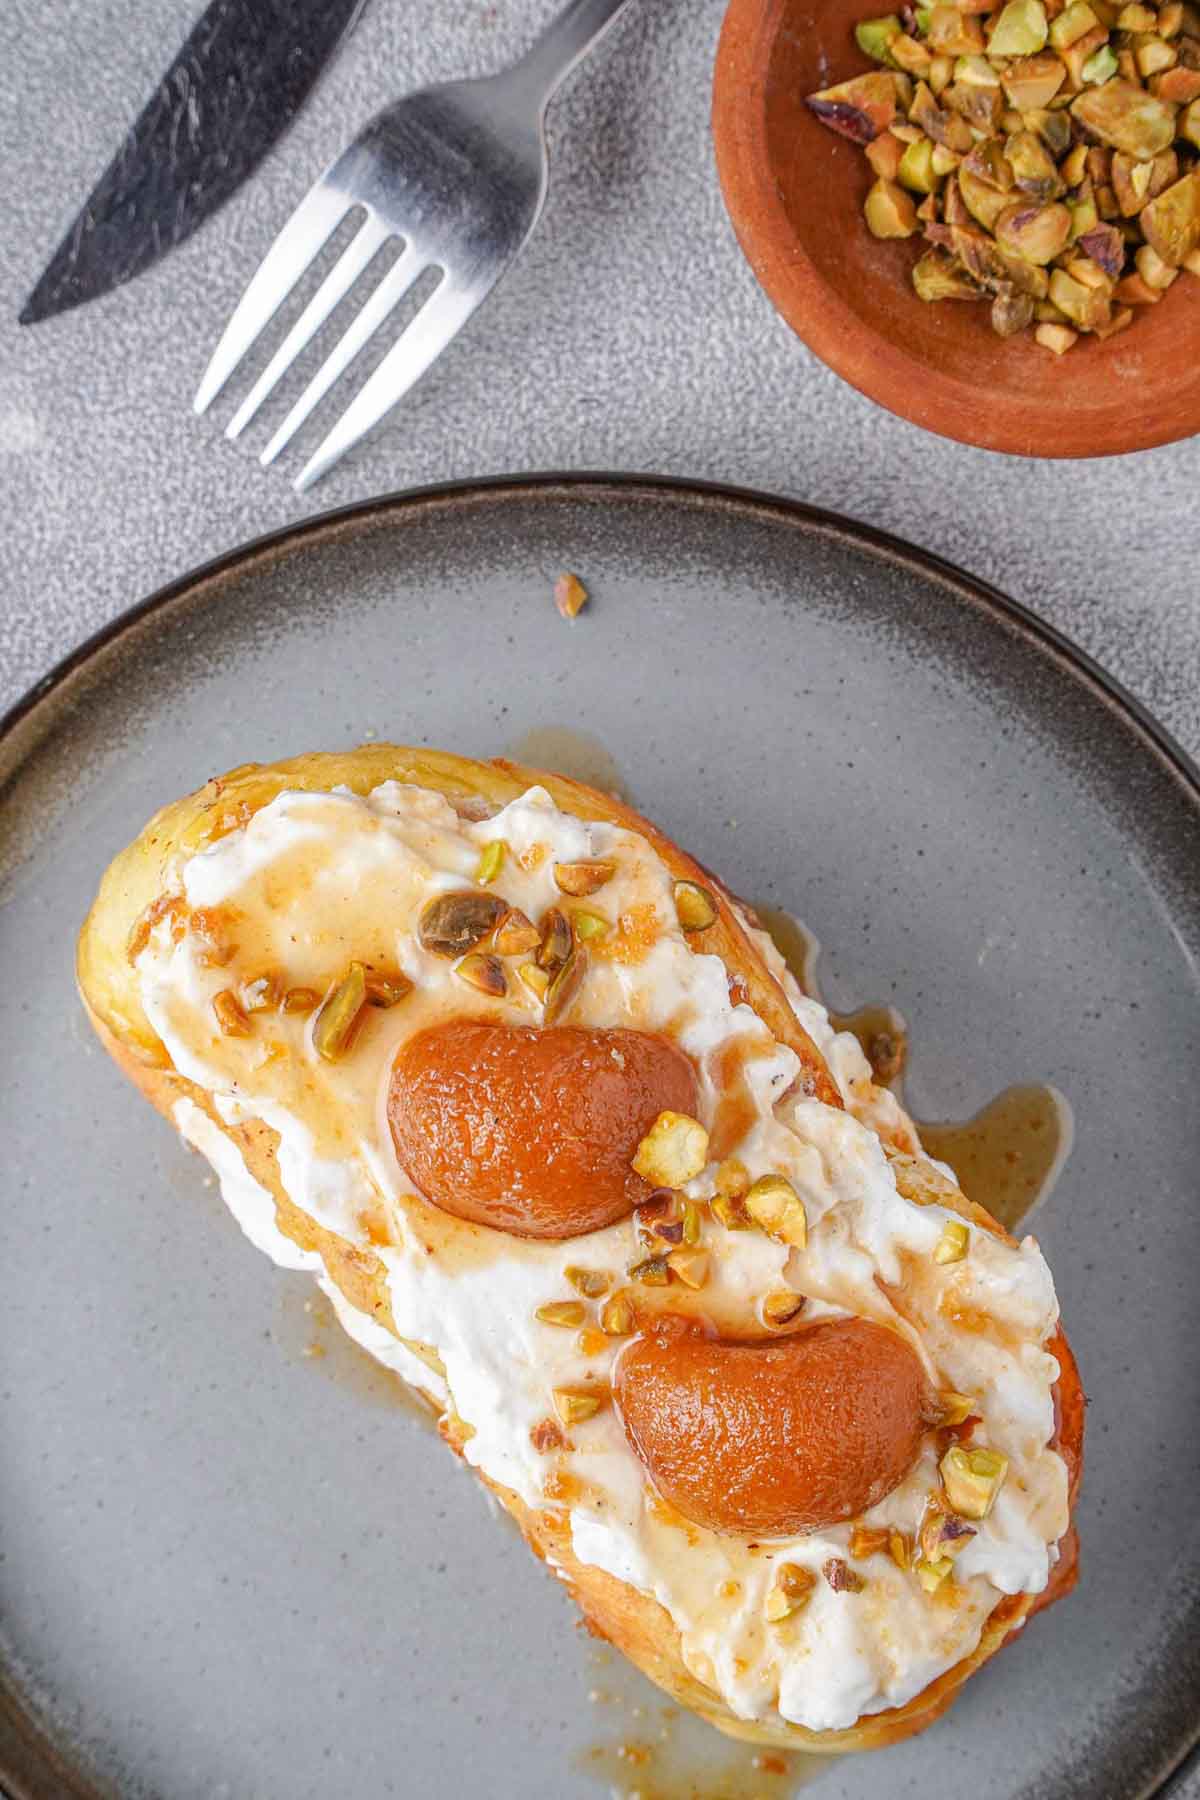 A bird's eye view of the French toast, allowing one to clearly see the gulab jamun pieces resting on the cream layer above the toast.